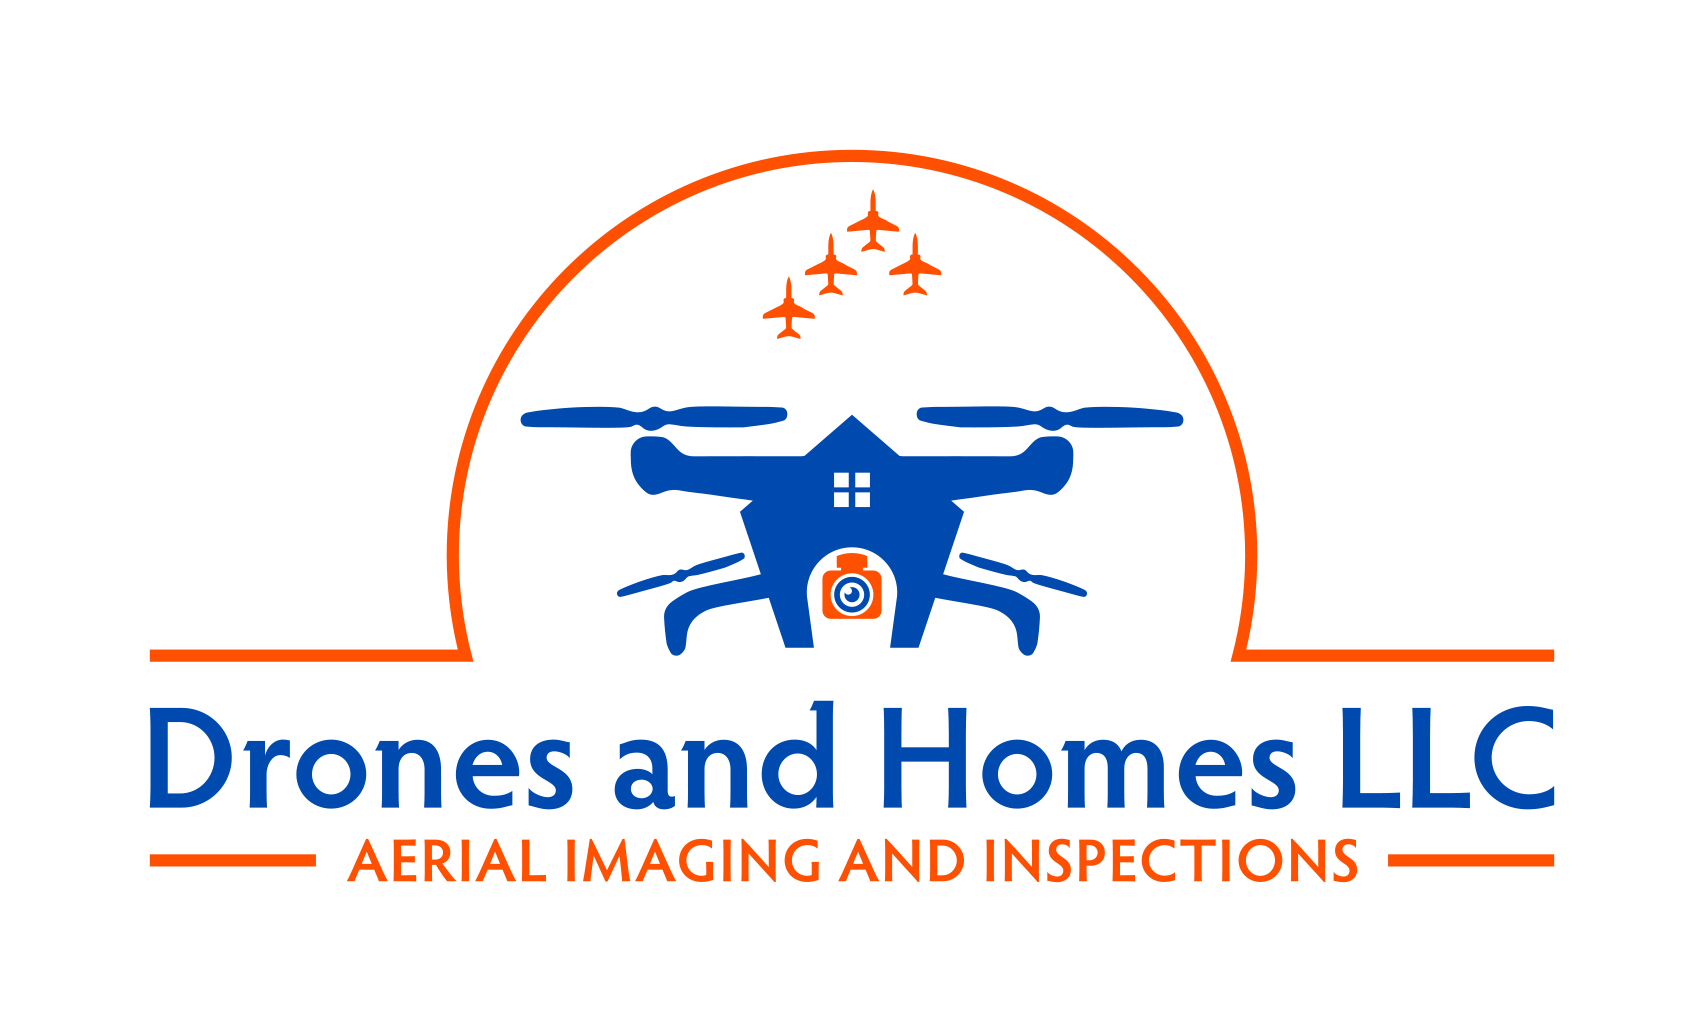 Drones and Homes LLC